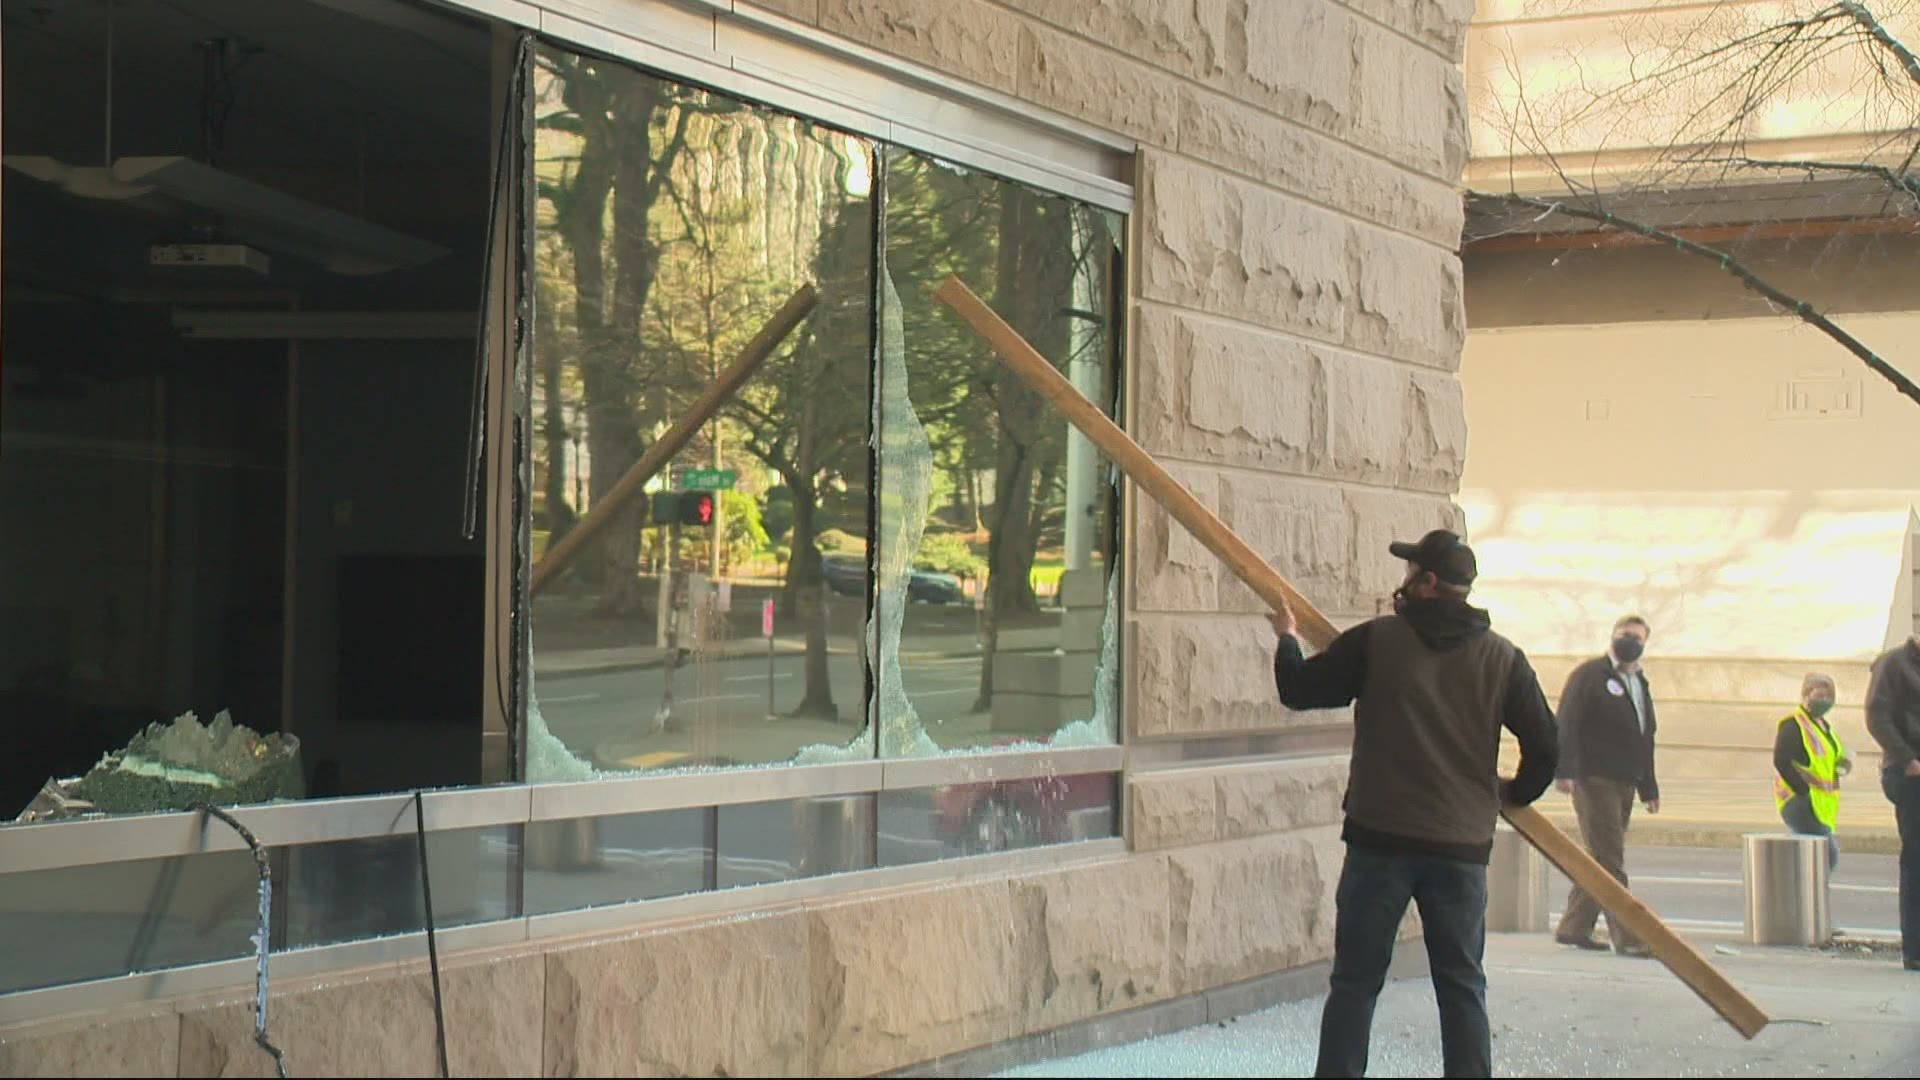 Just one day after crews took down the fence around the federal courthouse downtown, a group of people broke windows and clashed with federal police.